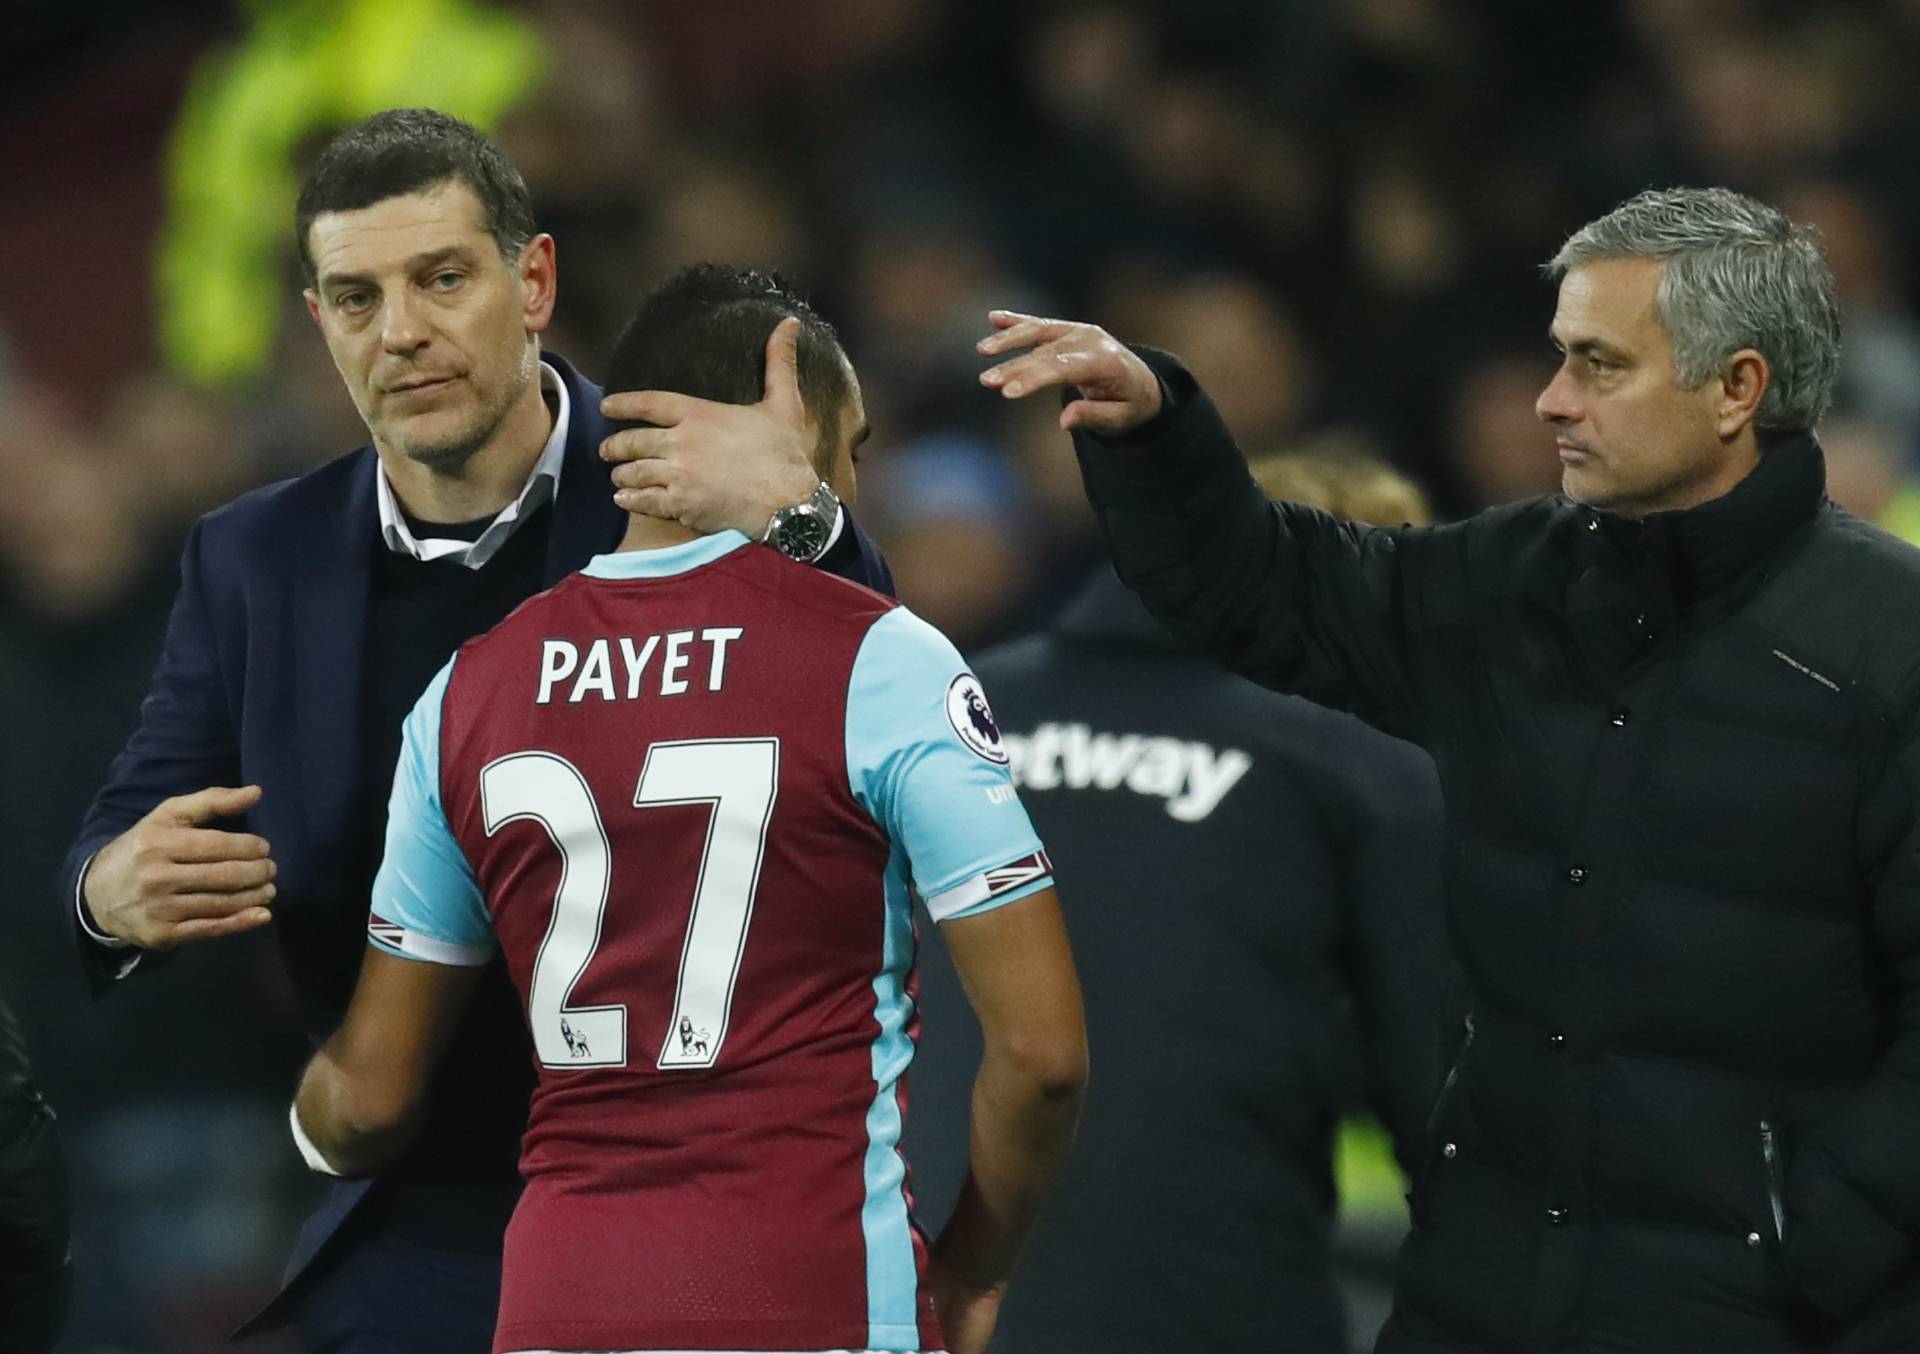 Manchester United manager Jose Mourinho gestures as West Ham United's Dimitri Payet hugs West Ham United manager Slaven Bilic after he is substituted off